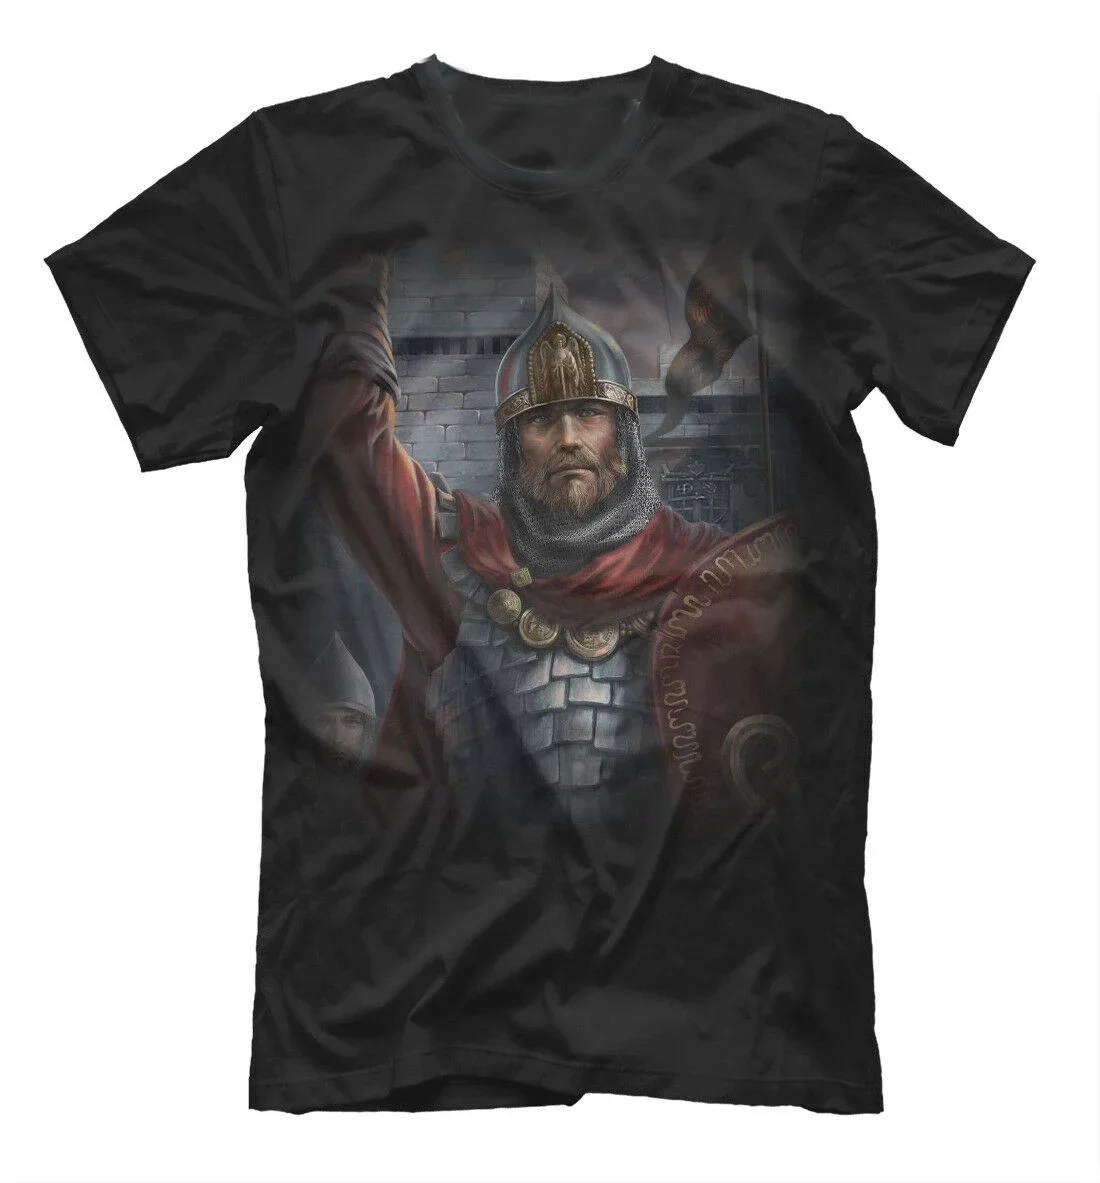 

Russian Prince Slavs Orthodox Holy Russia T-Shirt 100% Cotton O-Neck Summer Short Sleeve Casual Mens T-shirt Size S-3XL